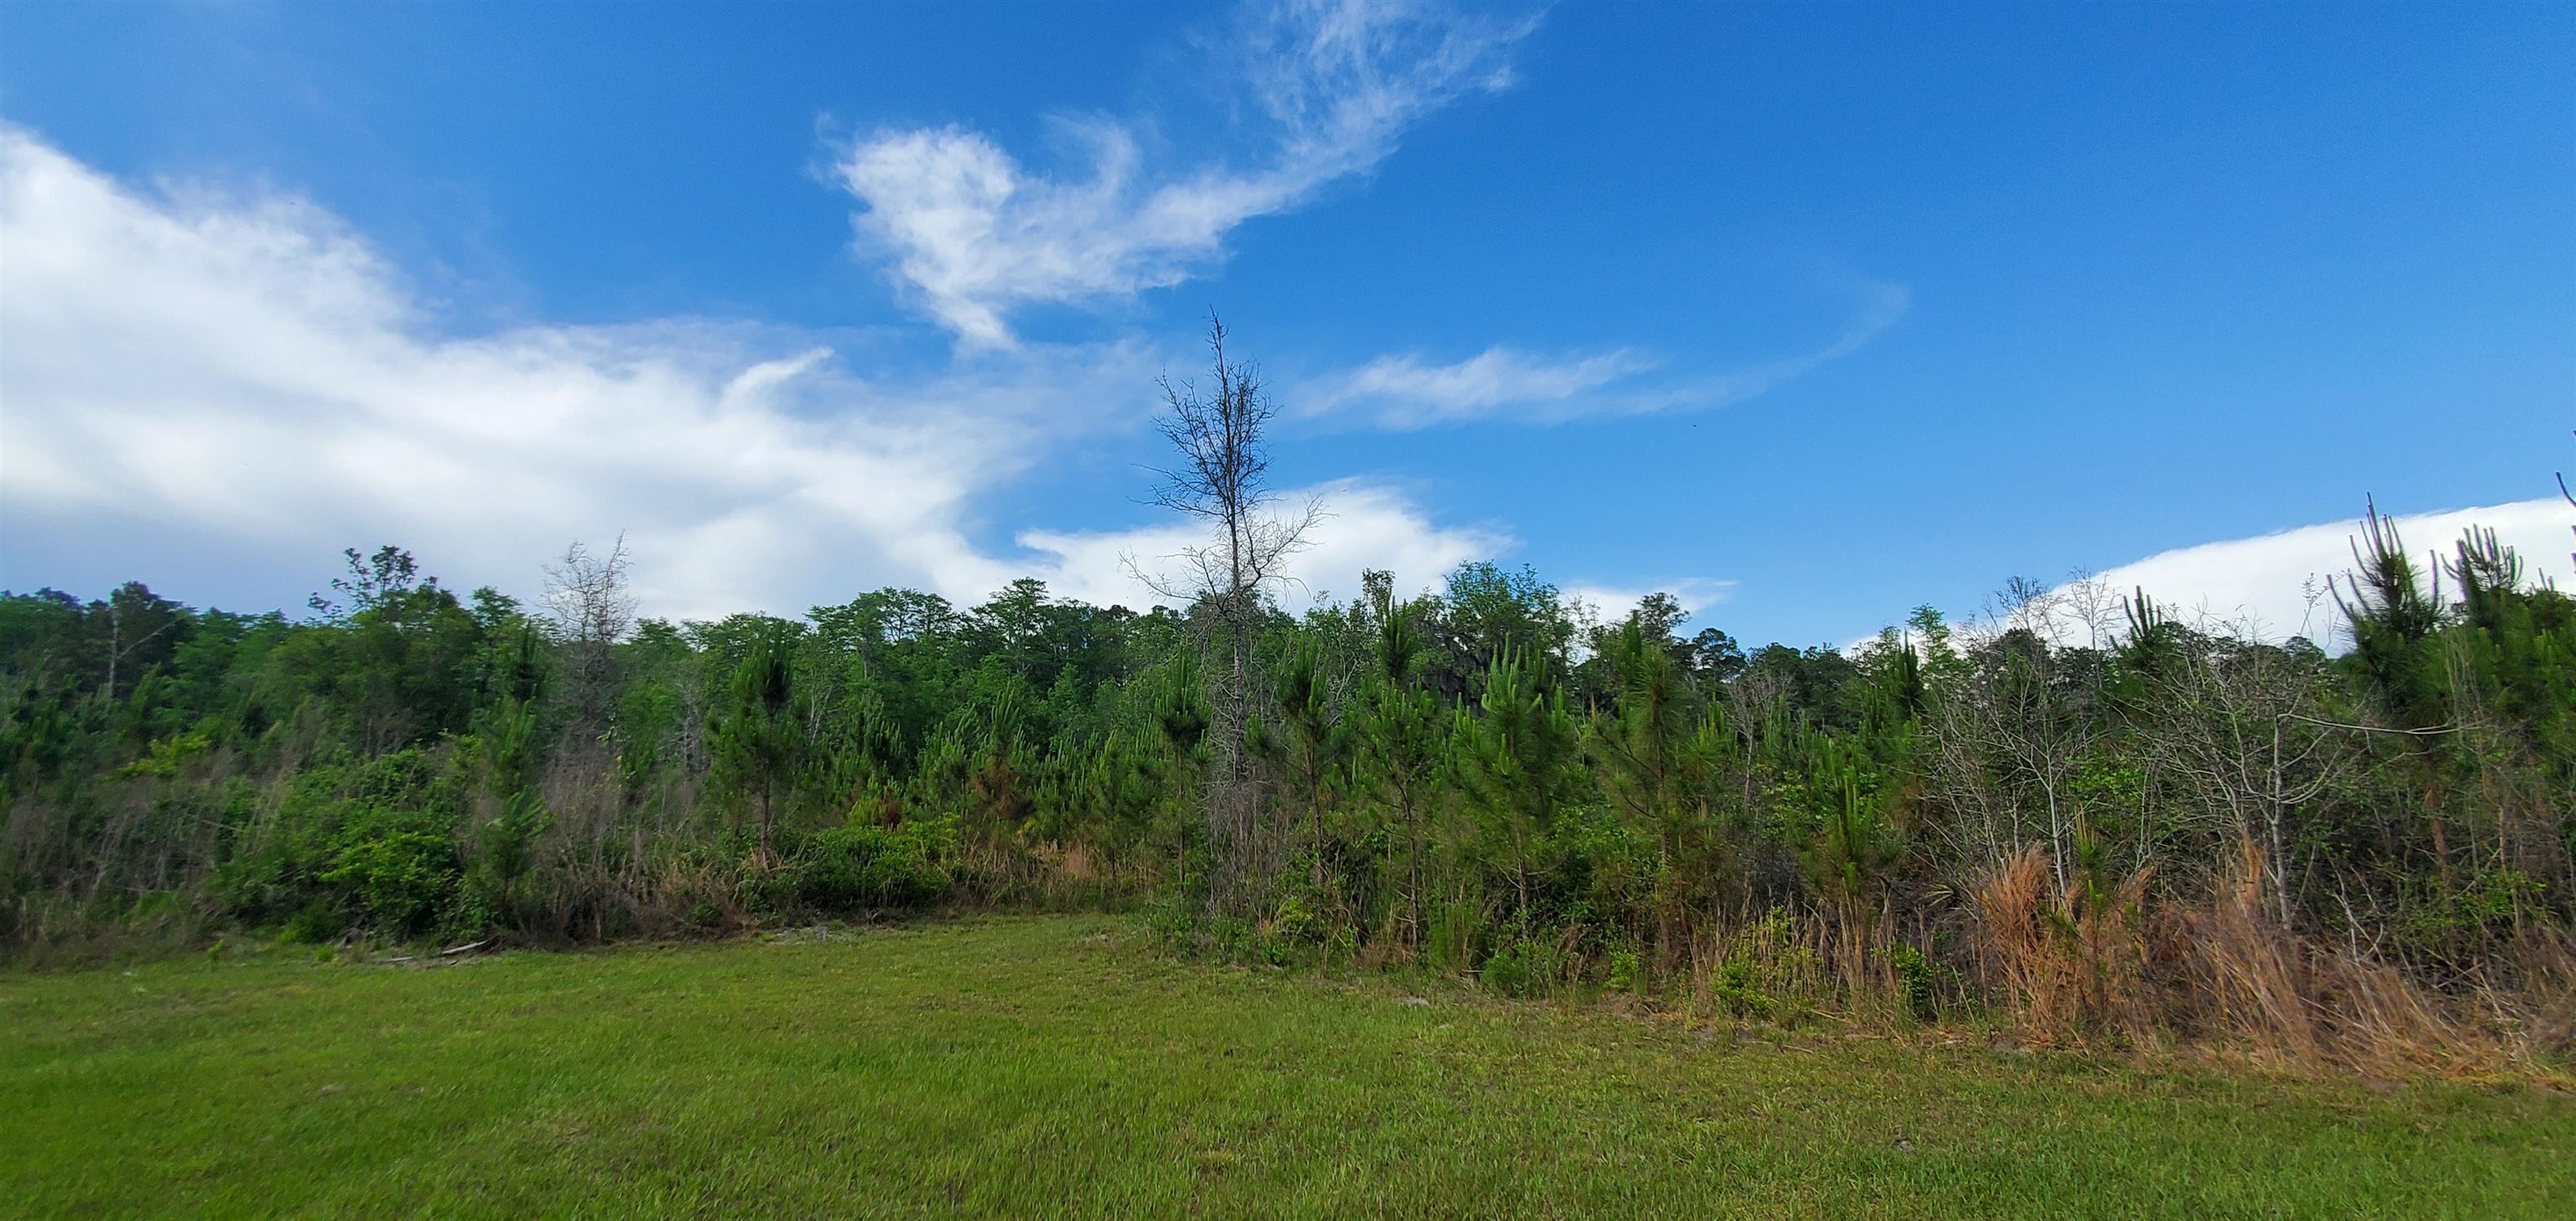 78.7 acres Vacant Mt Gilead,GREENVILLE,Florida 32331,Lots and land,Vacant Mt Gilead,345624